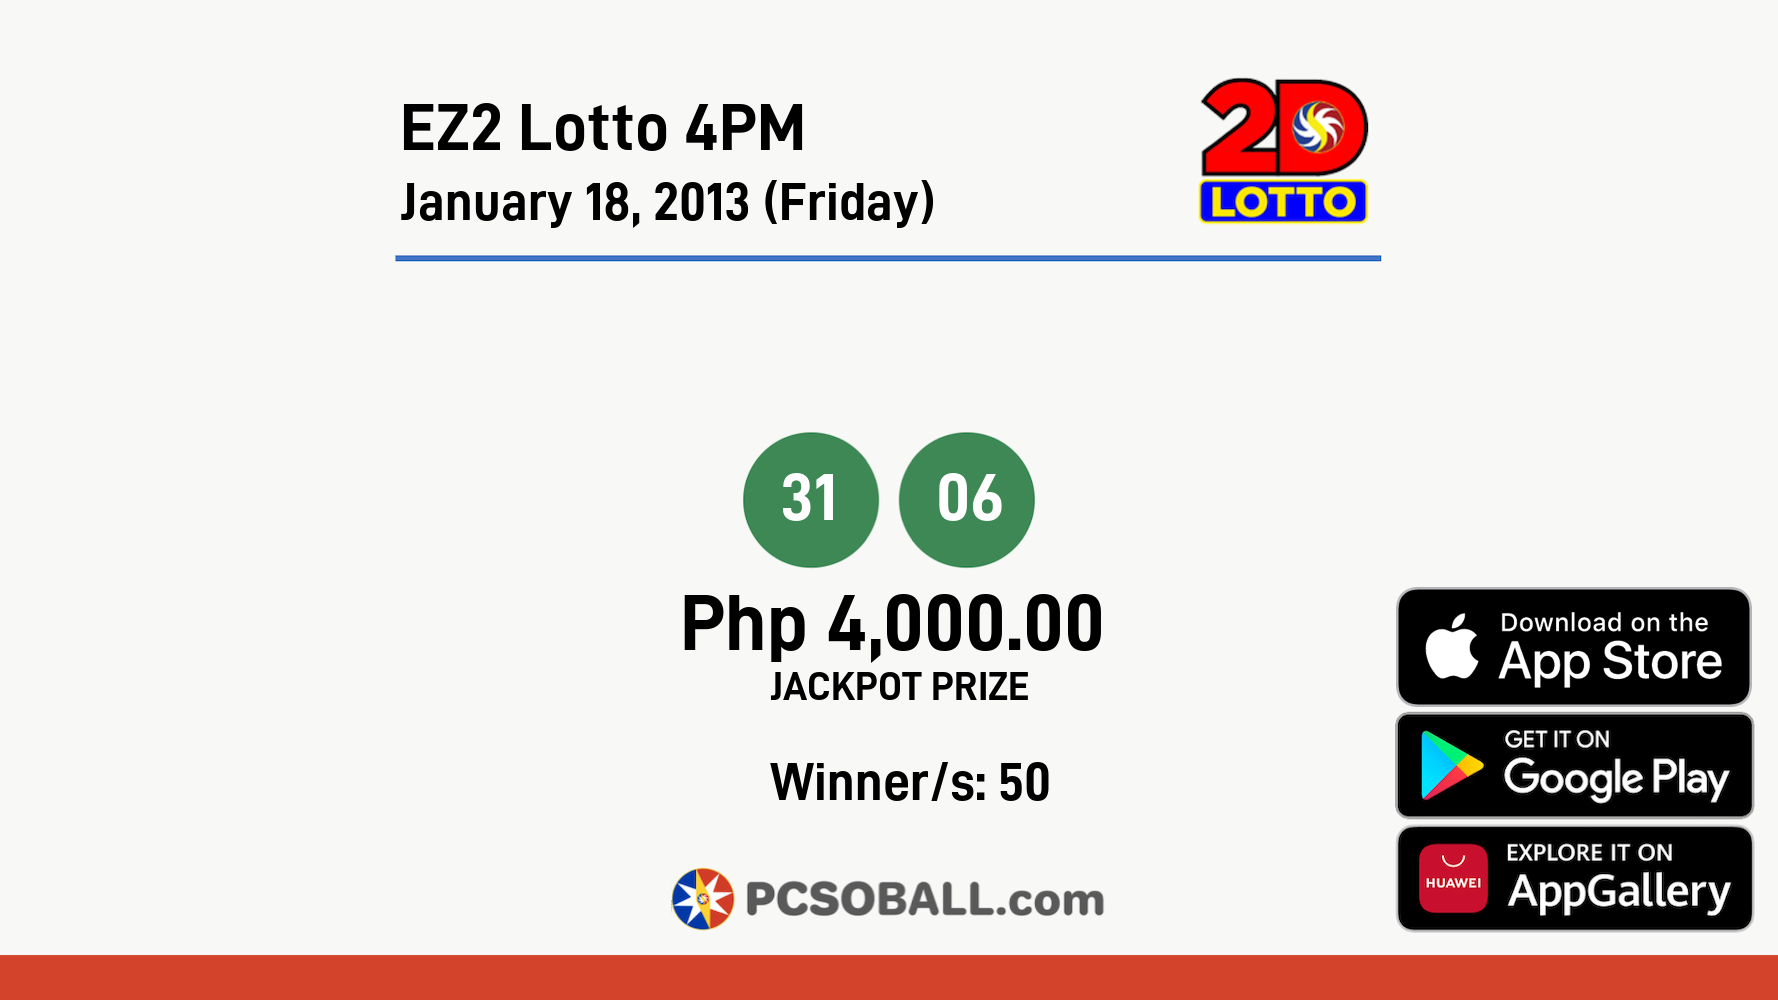 EZ2 Lotto 4PM January 18, 2013 (Friday) Result